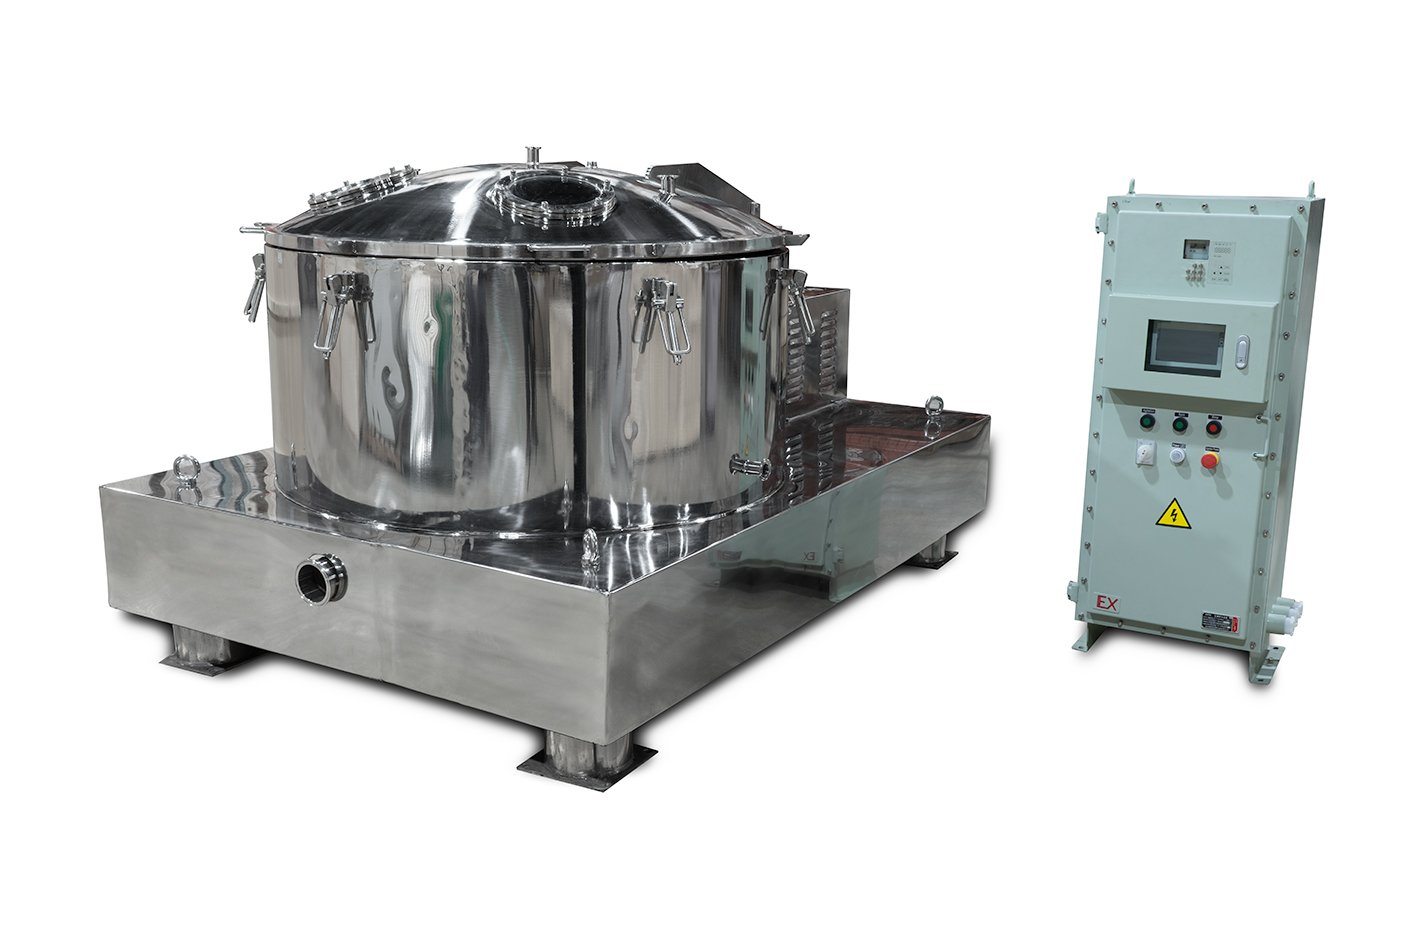 160L Jacketed Stainless Steel Centrifuge with Explosion Proof Motor and Siemens Controller - 55LB Max Capacity New Products BVV 